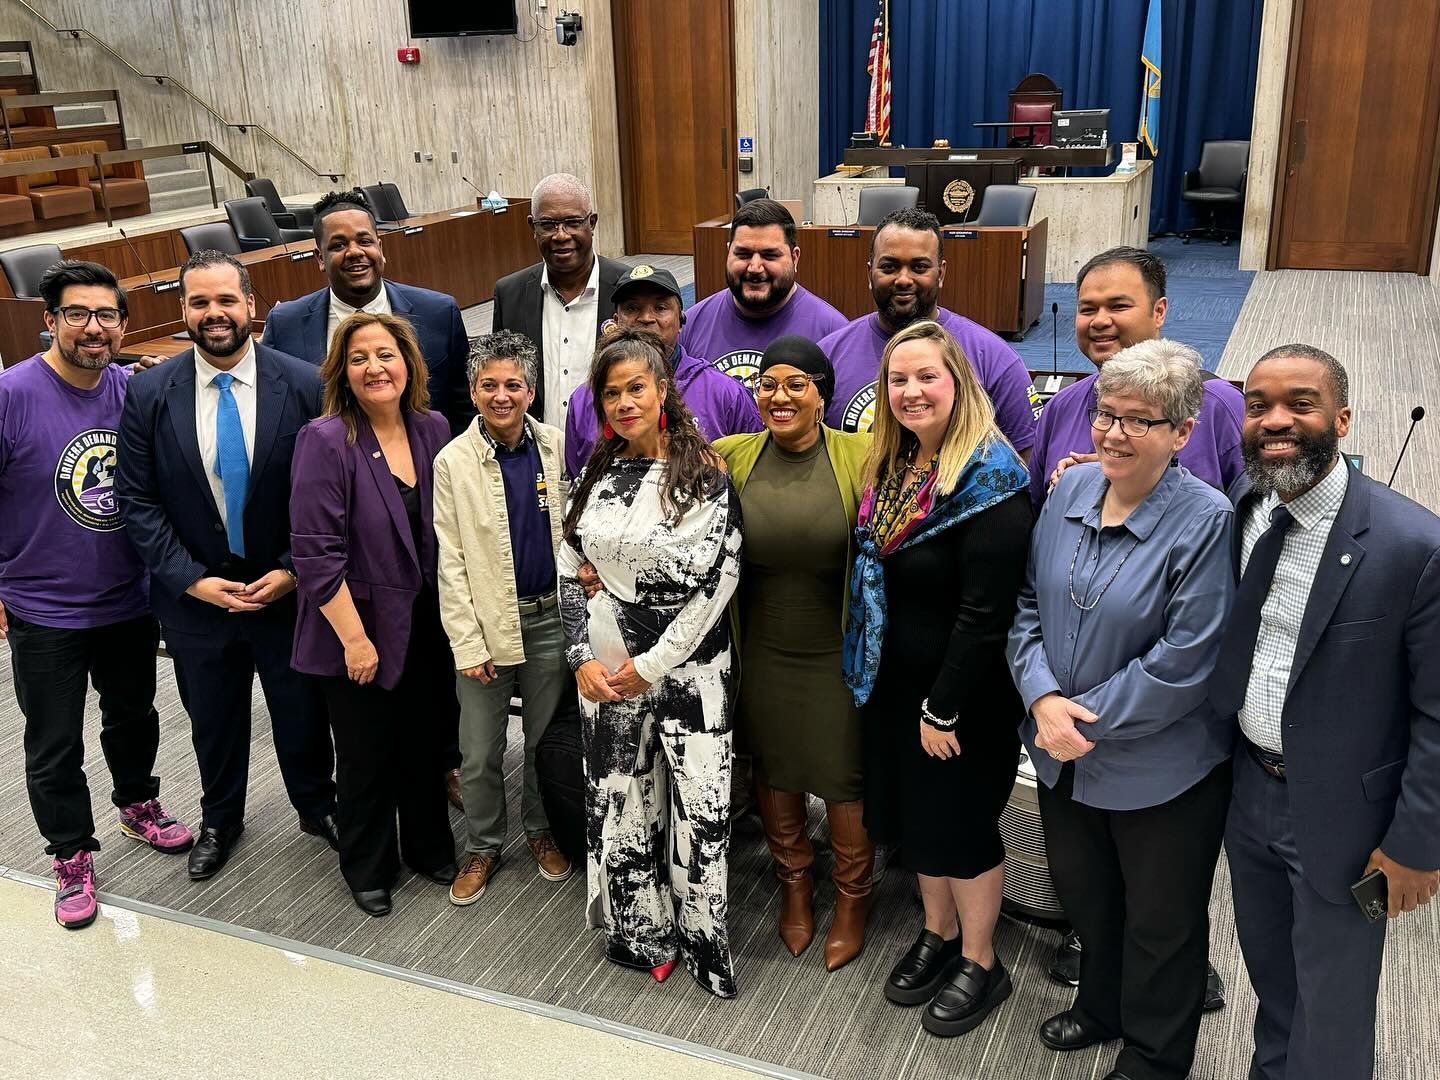 Great to have members of @32bjseiu join today&rsquo;s Boston City Council Meeting! Boston is a union town, and we always support the right for workers to organize for livable wages and fair benefits!